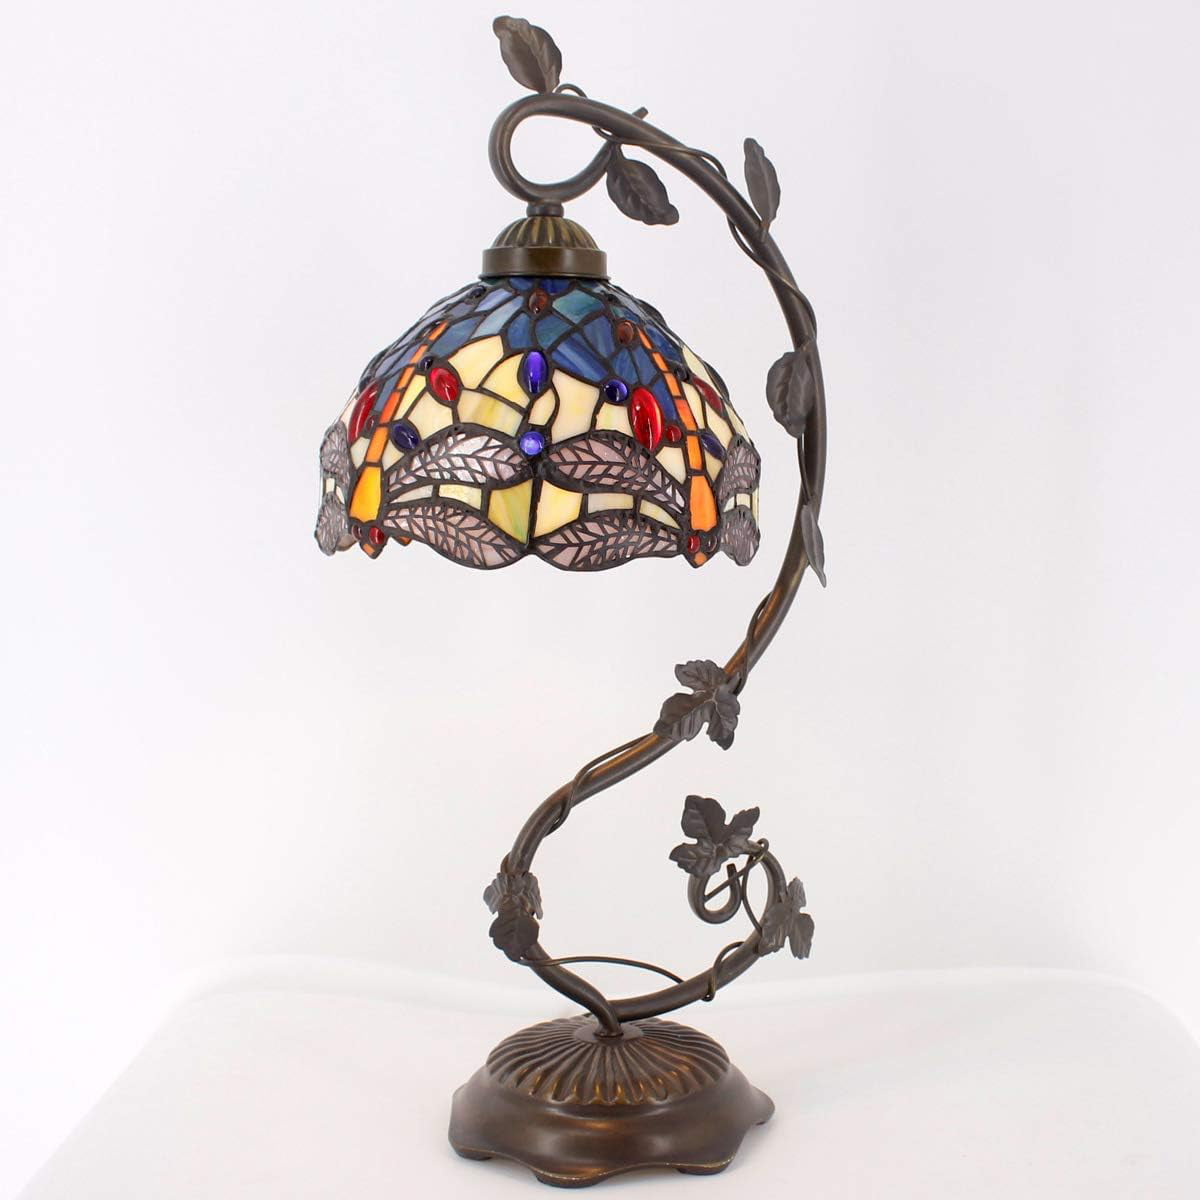 GEDUBIUBOO  Lamp Stained Glass Table Lamp Blue Yellow Dragonfly Style Desk Light Metal Leaf Base 8X10X21 Inches Decor Small Space Bedroom  Office S128 Series